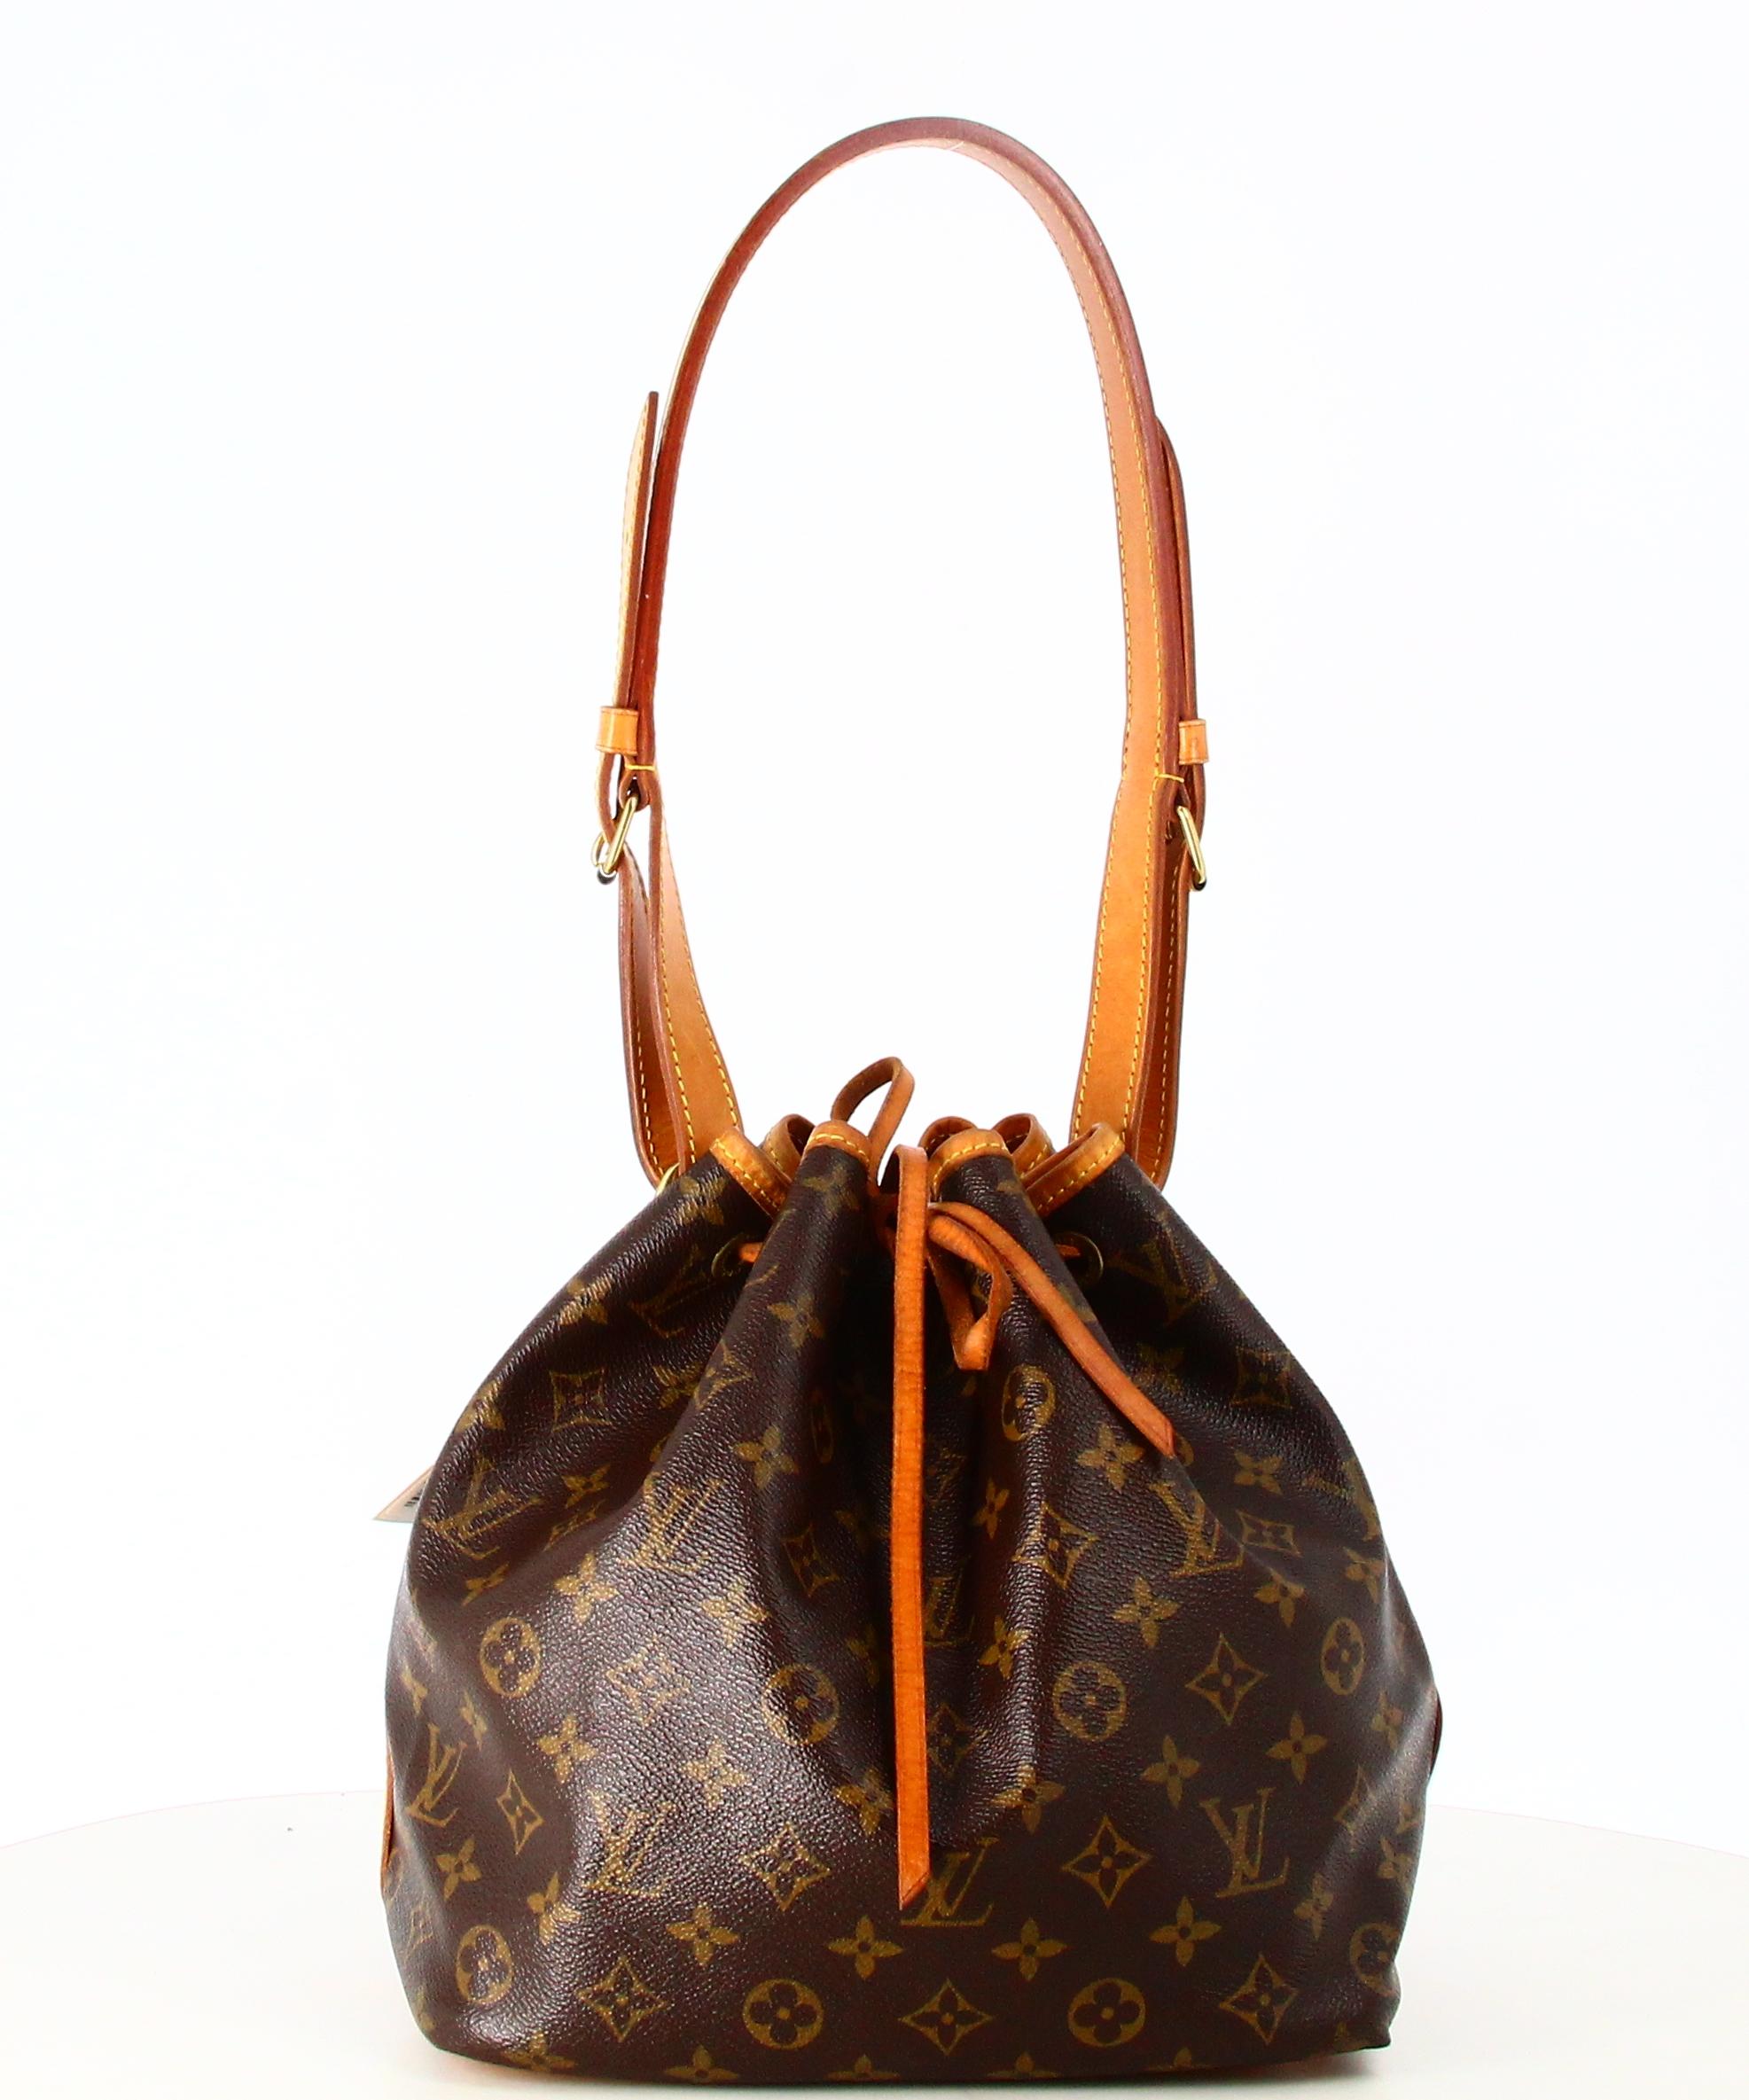 1989 Louis Vuitton Canvas Monogram Noe Handbag

- Very good condition. Shows very slight signs of wear over time. 
- Louis Vuitton Bag
- Monogram canvas
- Brown leather shoulder strap 
- Brown leather lace